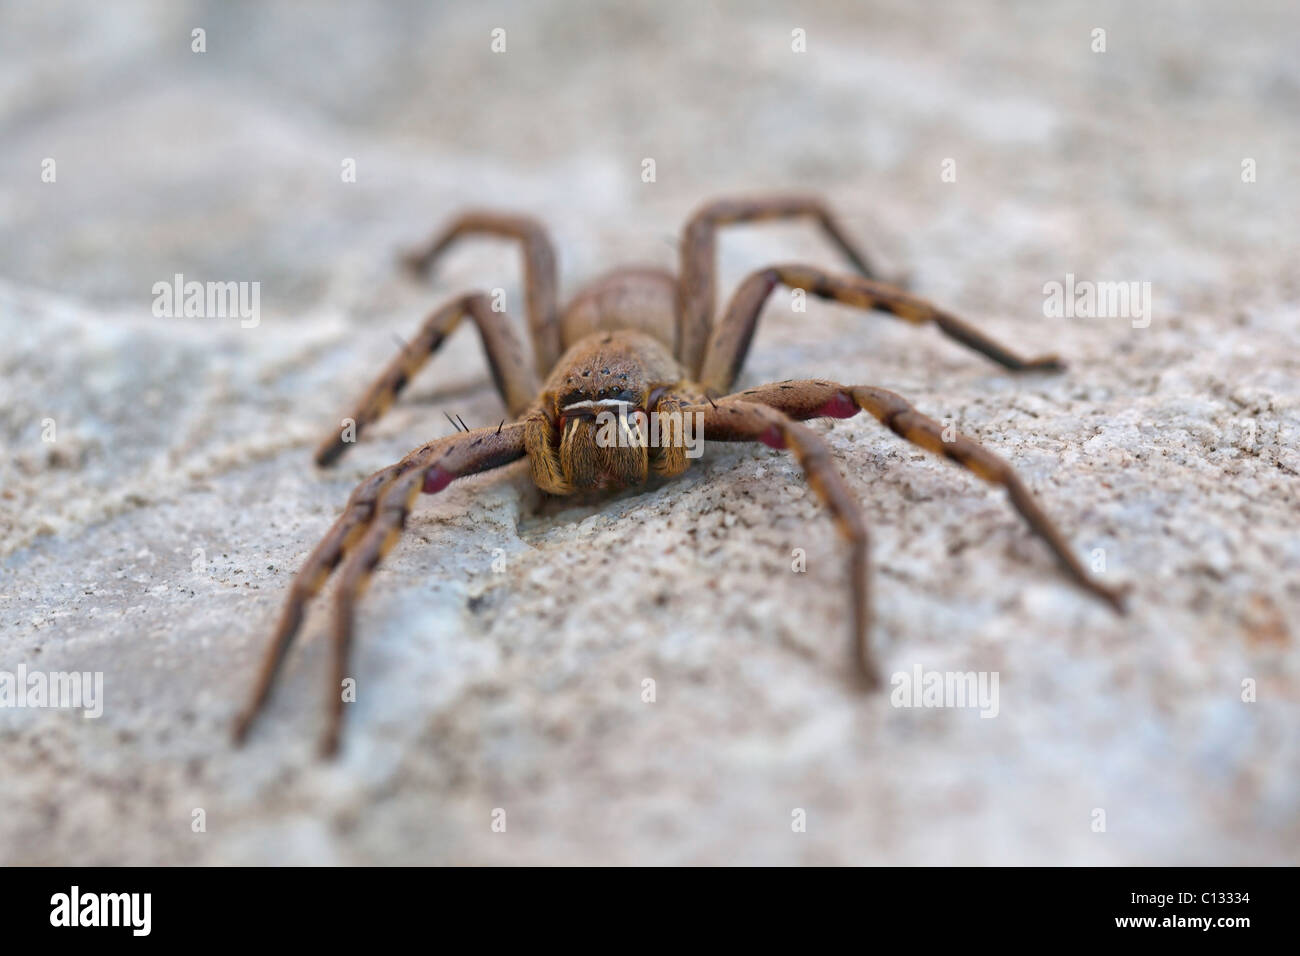 Portrait of spider, Betty's Bay, Western Cape Province, South Africa Stock Photo